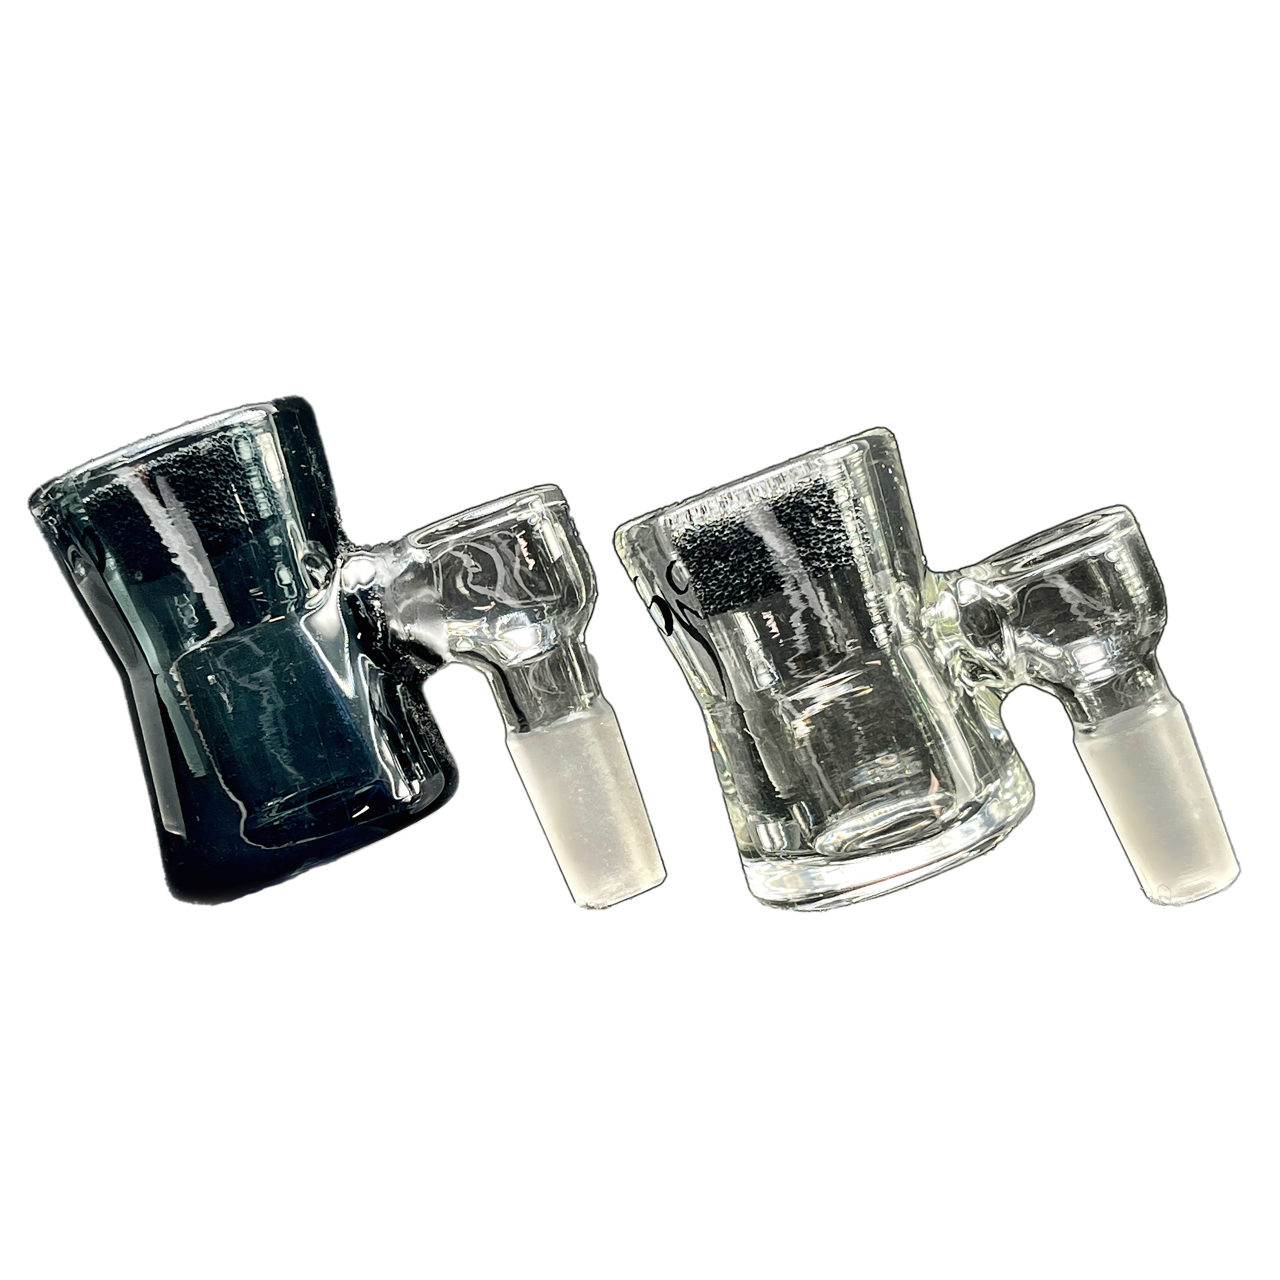 Glass Screens in Bowls: Better? Worse? Or Just Different? : r/chinaglass